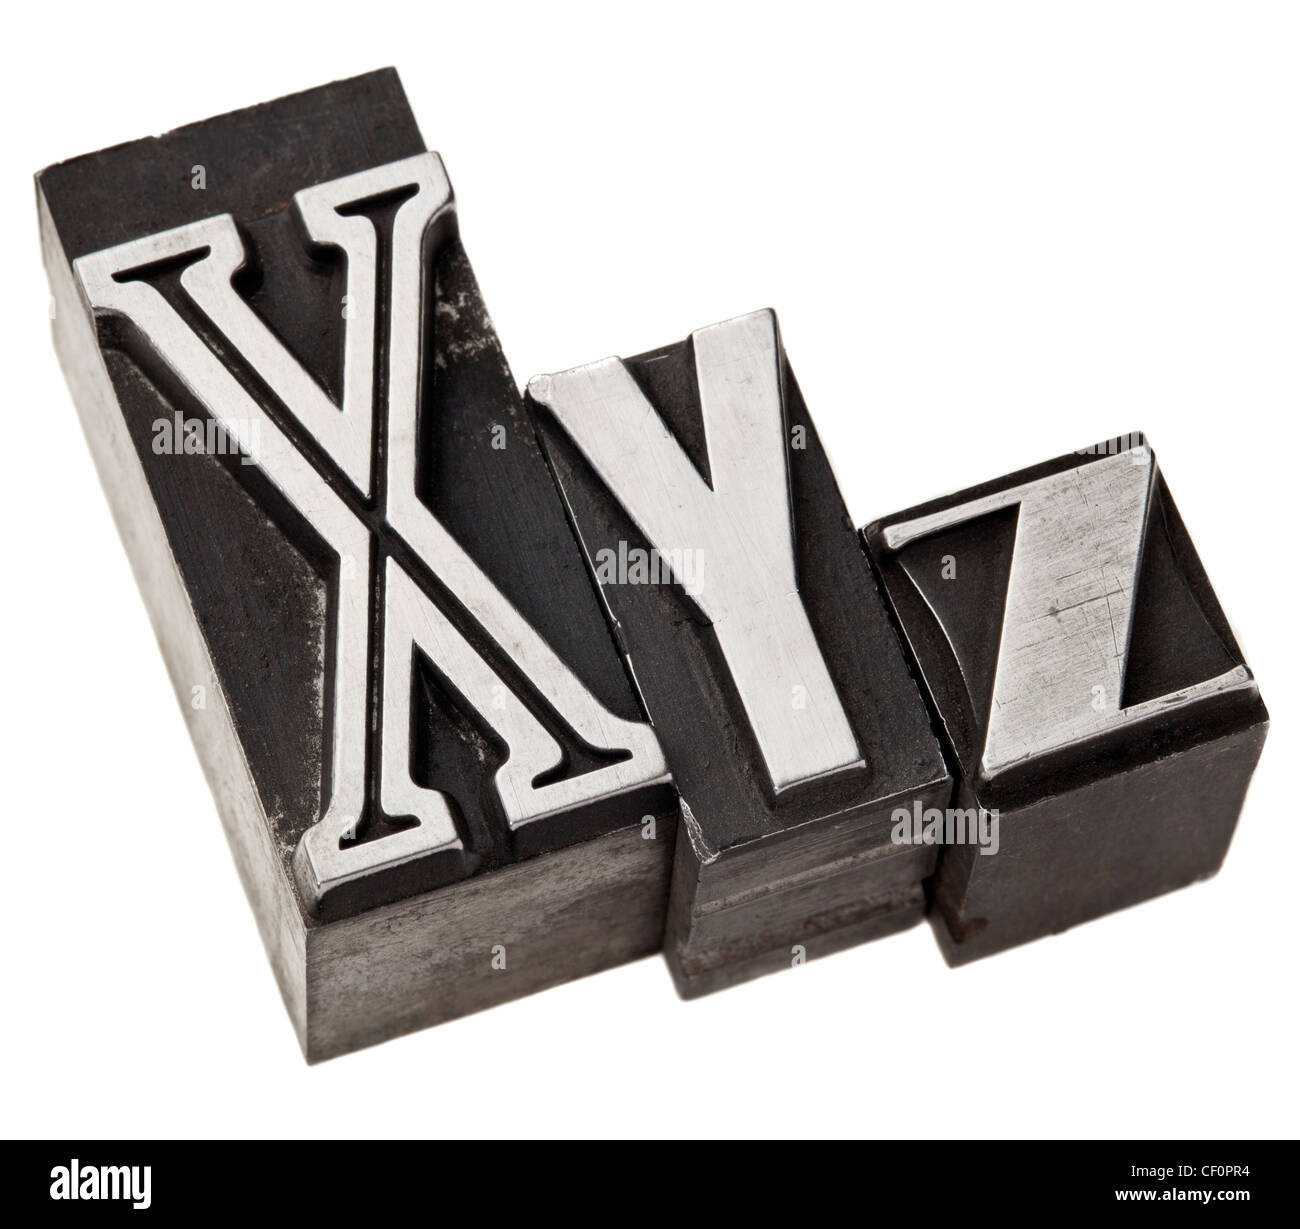 xyz - three last letters of alphabet (or Cartesian coordinates system) in vintage letterpress metal type Stock Photo